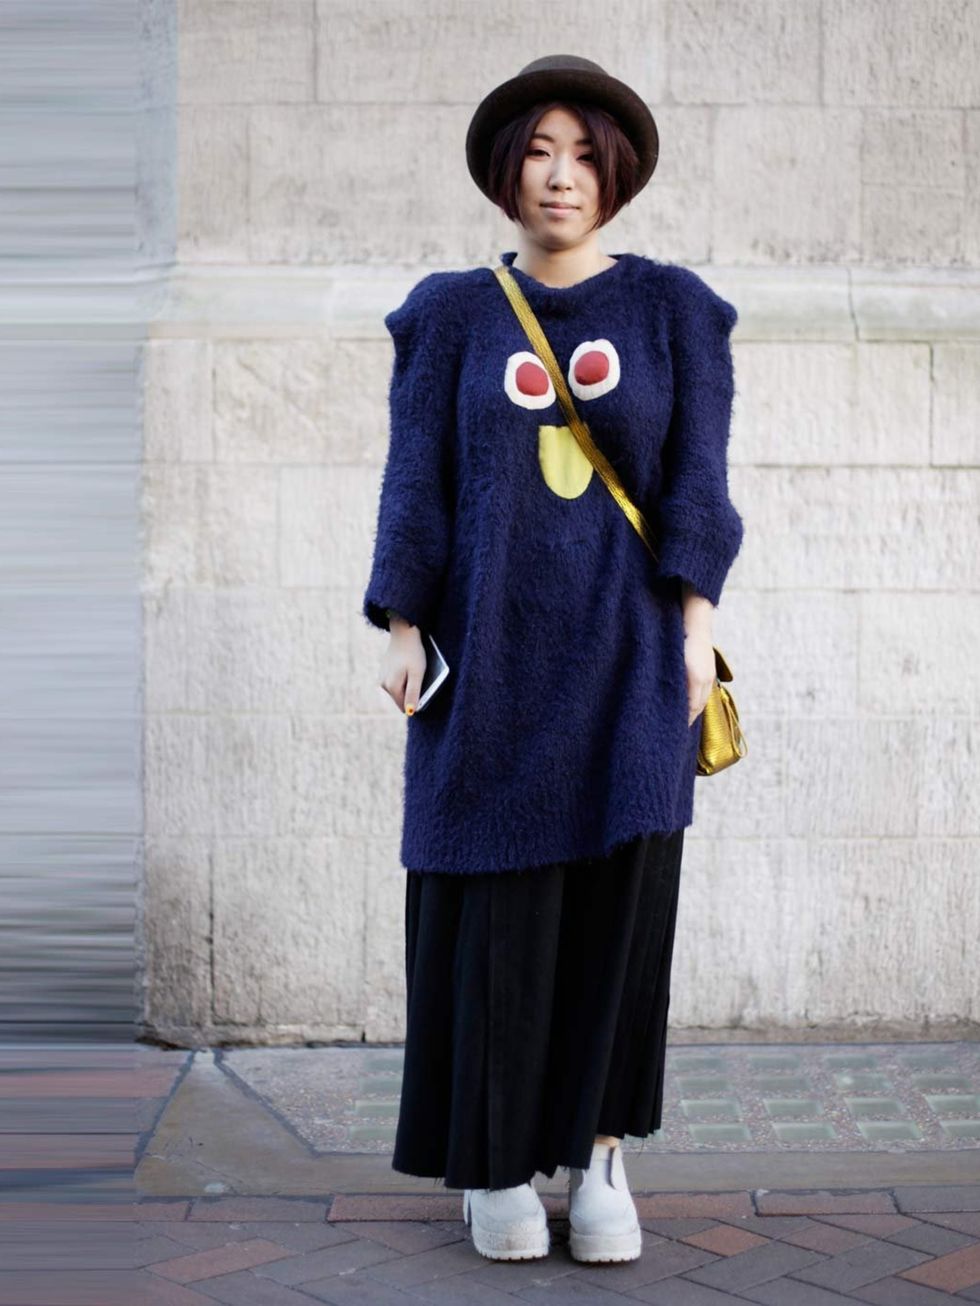 <p>Candy, 20, Student. Mercibeaucoup jumper, vintage skirt and hat, 3.1 Philip Lim bag.</p>